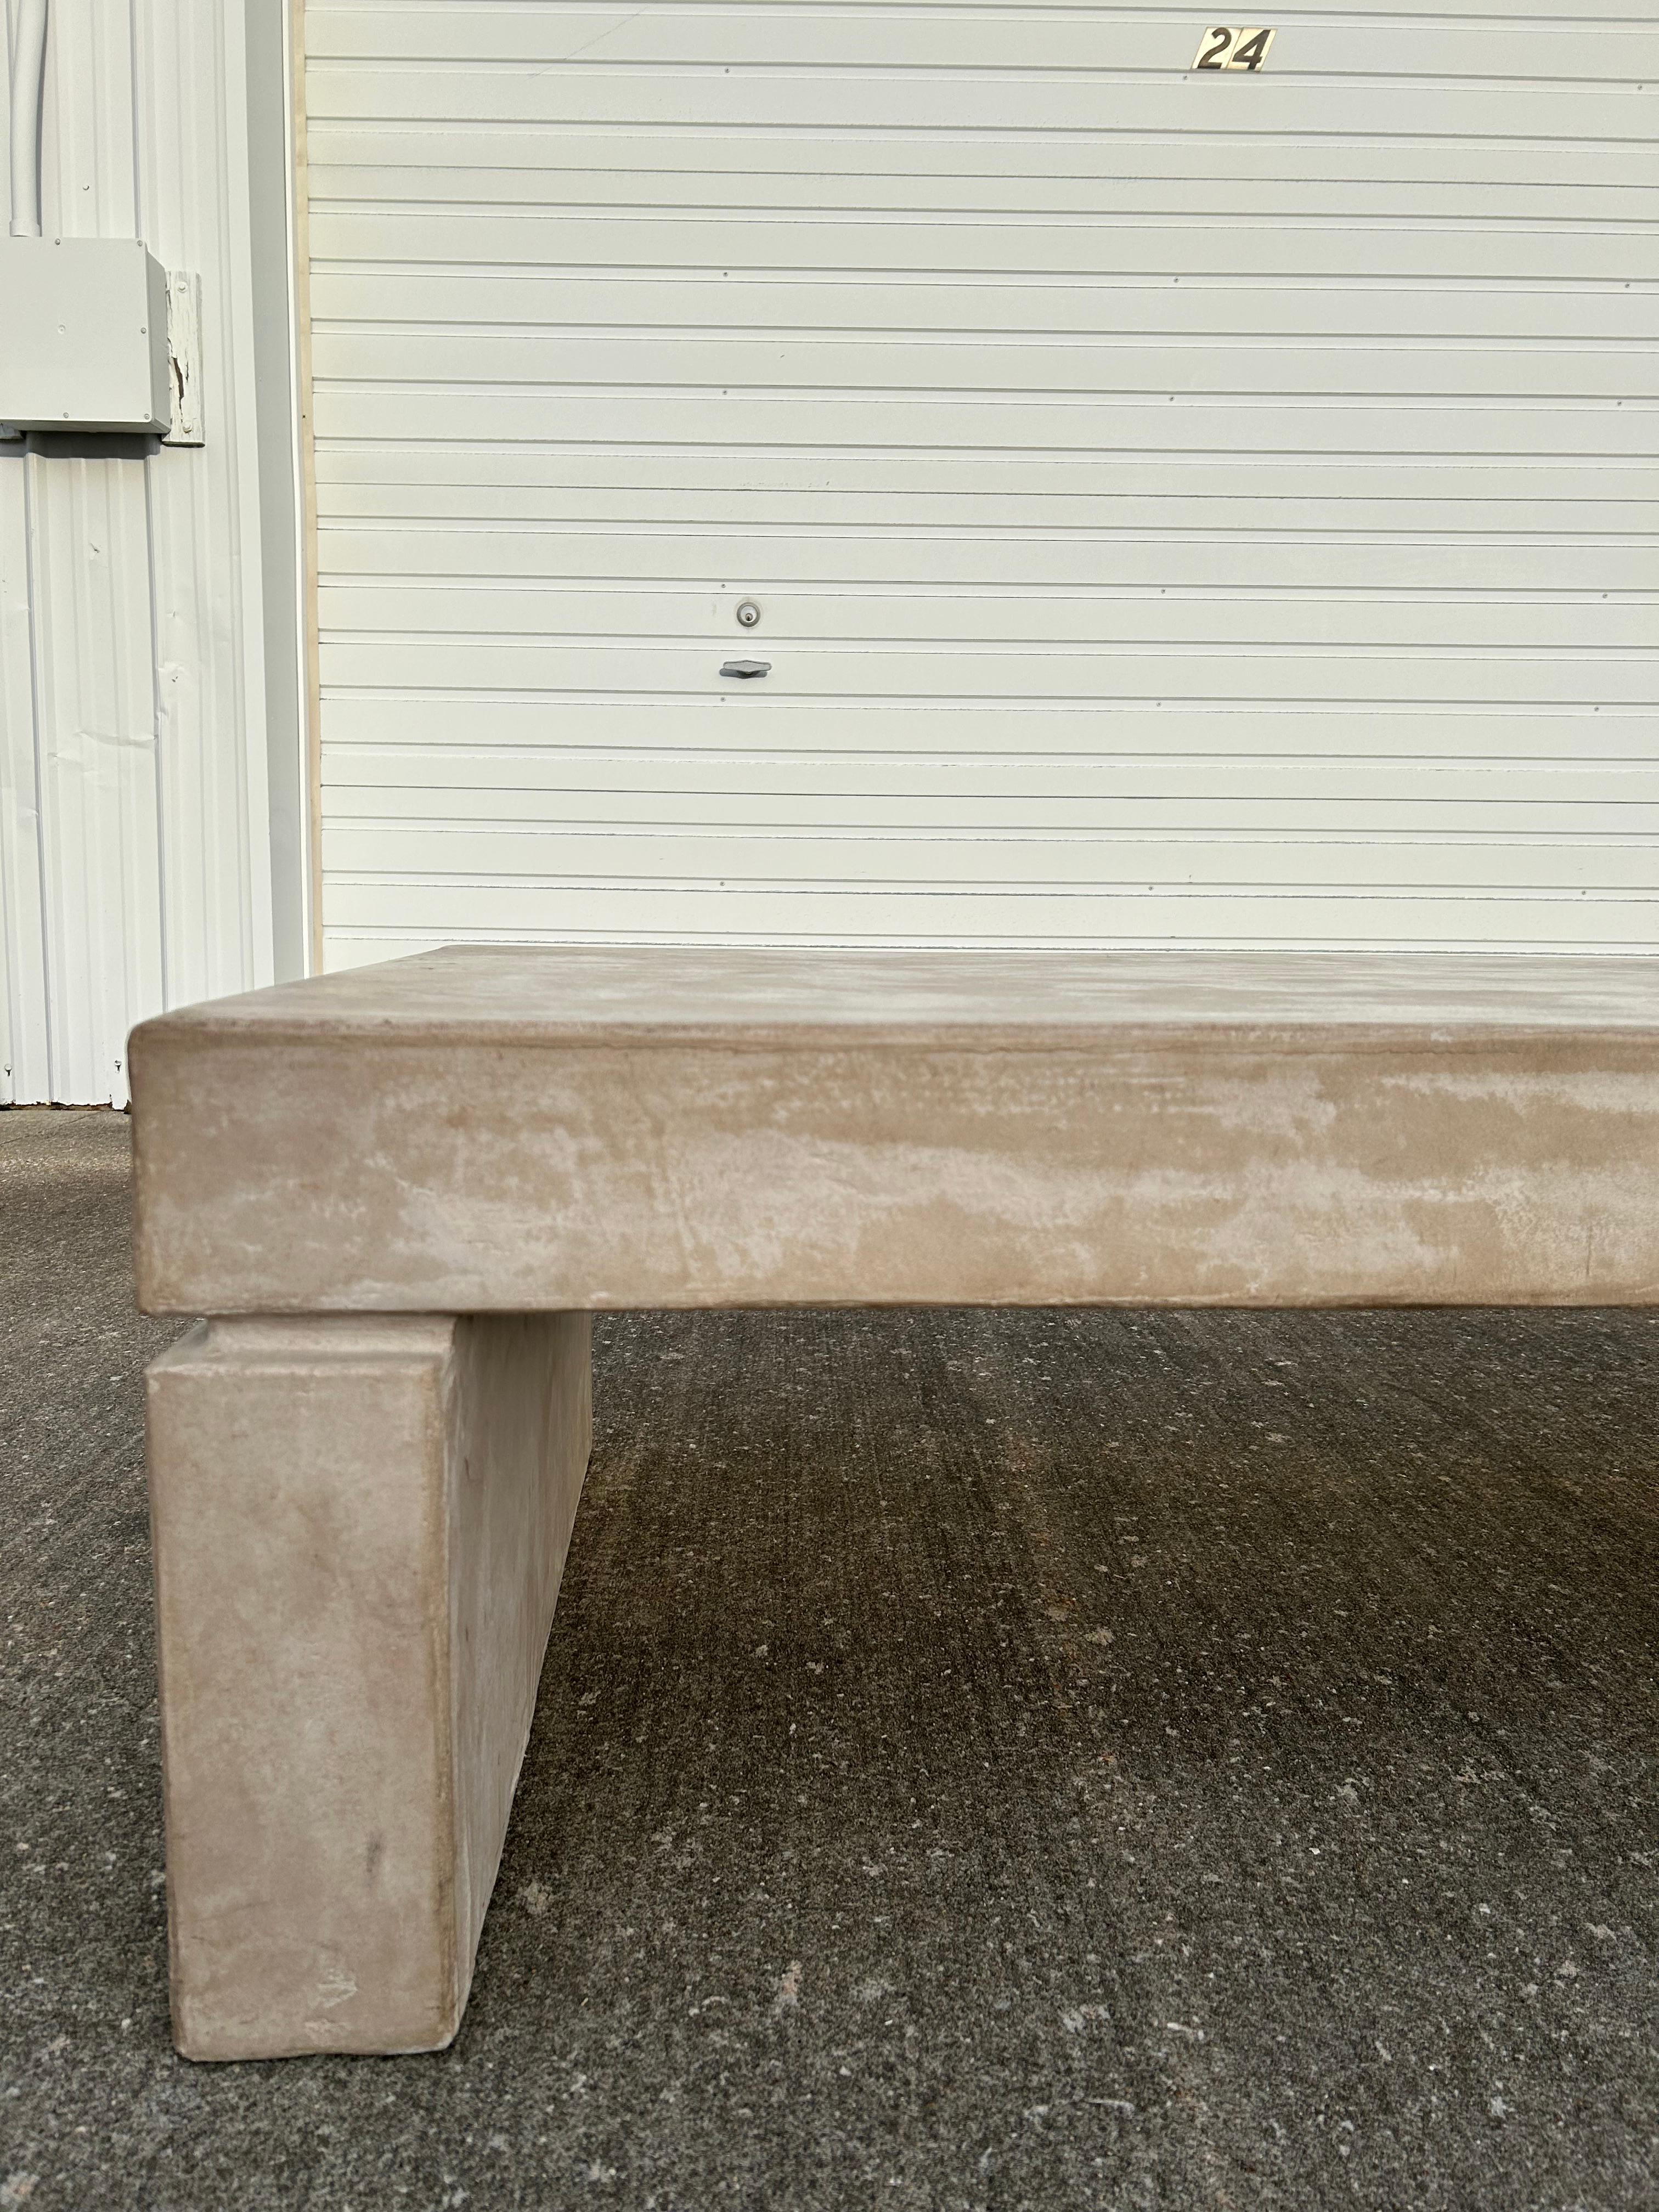 Vintage PostModern Concrete Finish Composite Plaster Coffee Table In Good Condition For Sale In Medina, OH